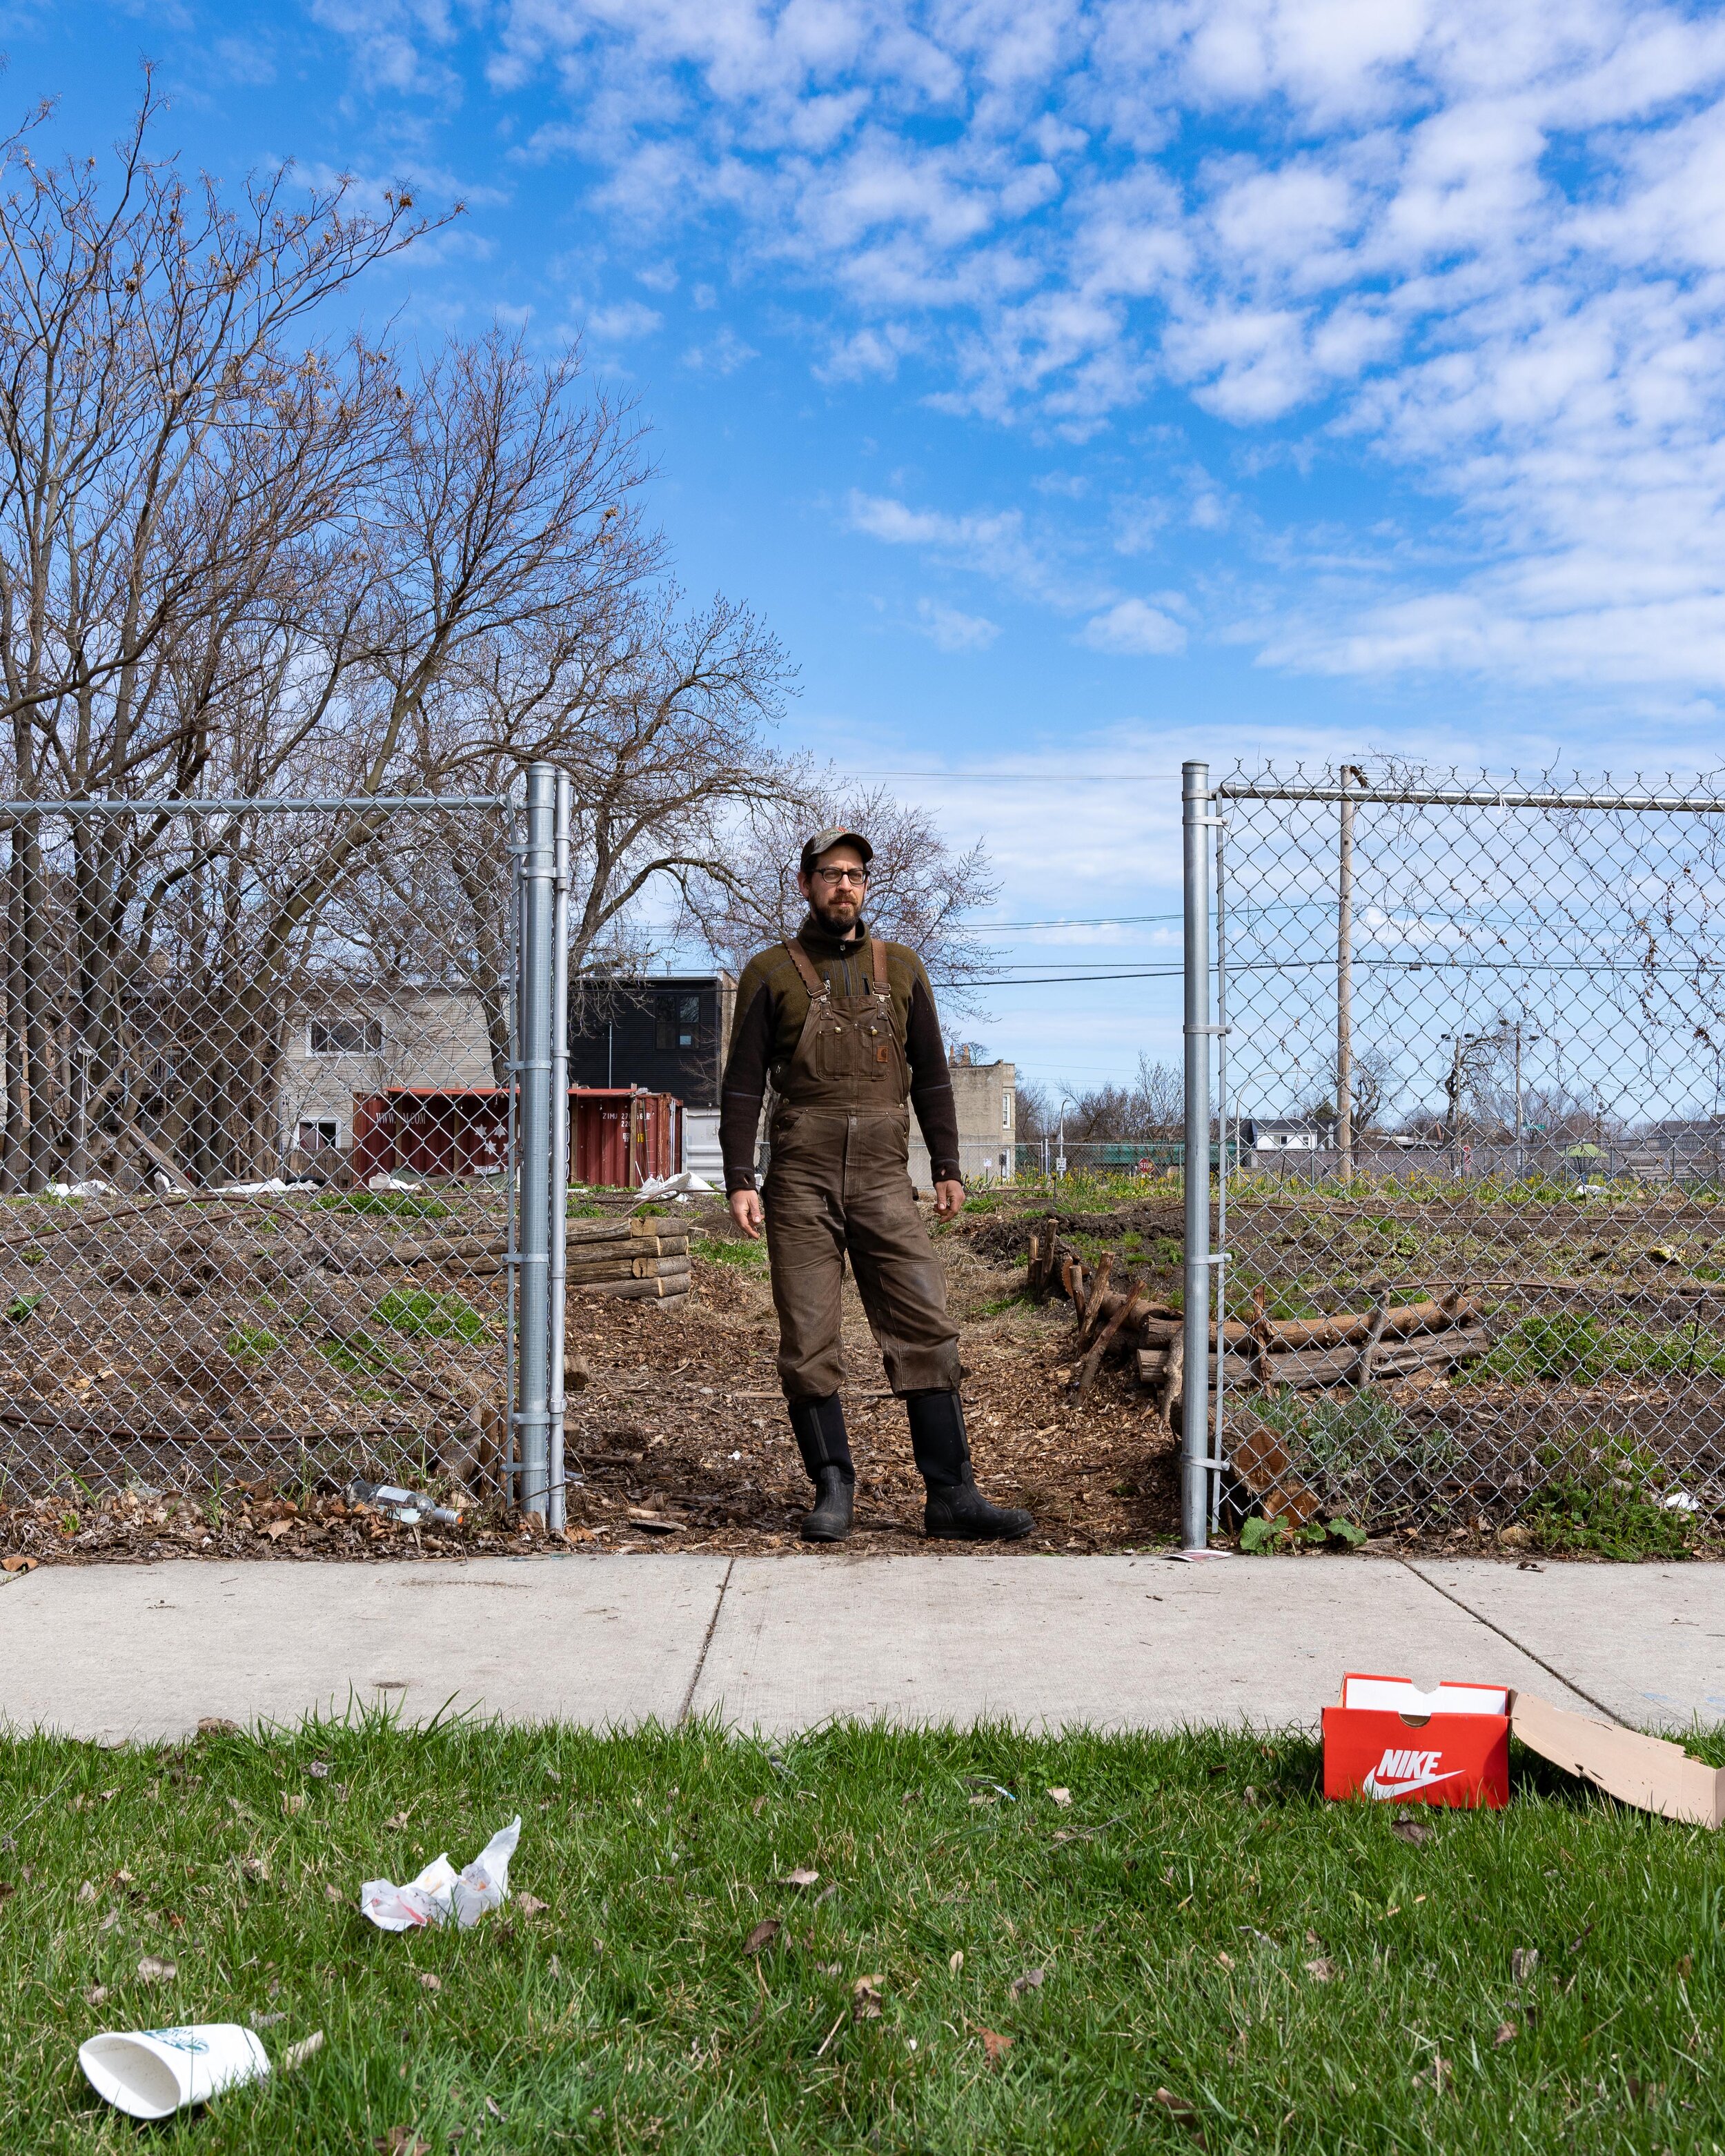  “I still love it, but it takes a lot to manage. Urban agriculture is such a difficult practice to get right, even when you get it right. I’m by no means sure where things will go from here, but I’m certainly not giving up on this.” - Kerem | 04/05/2